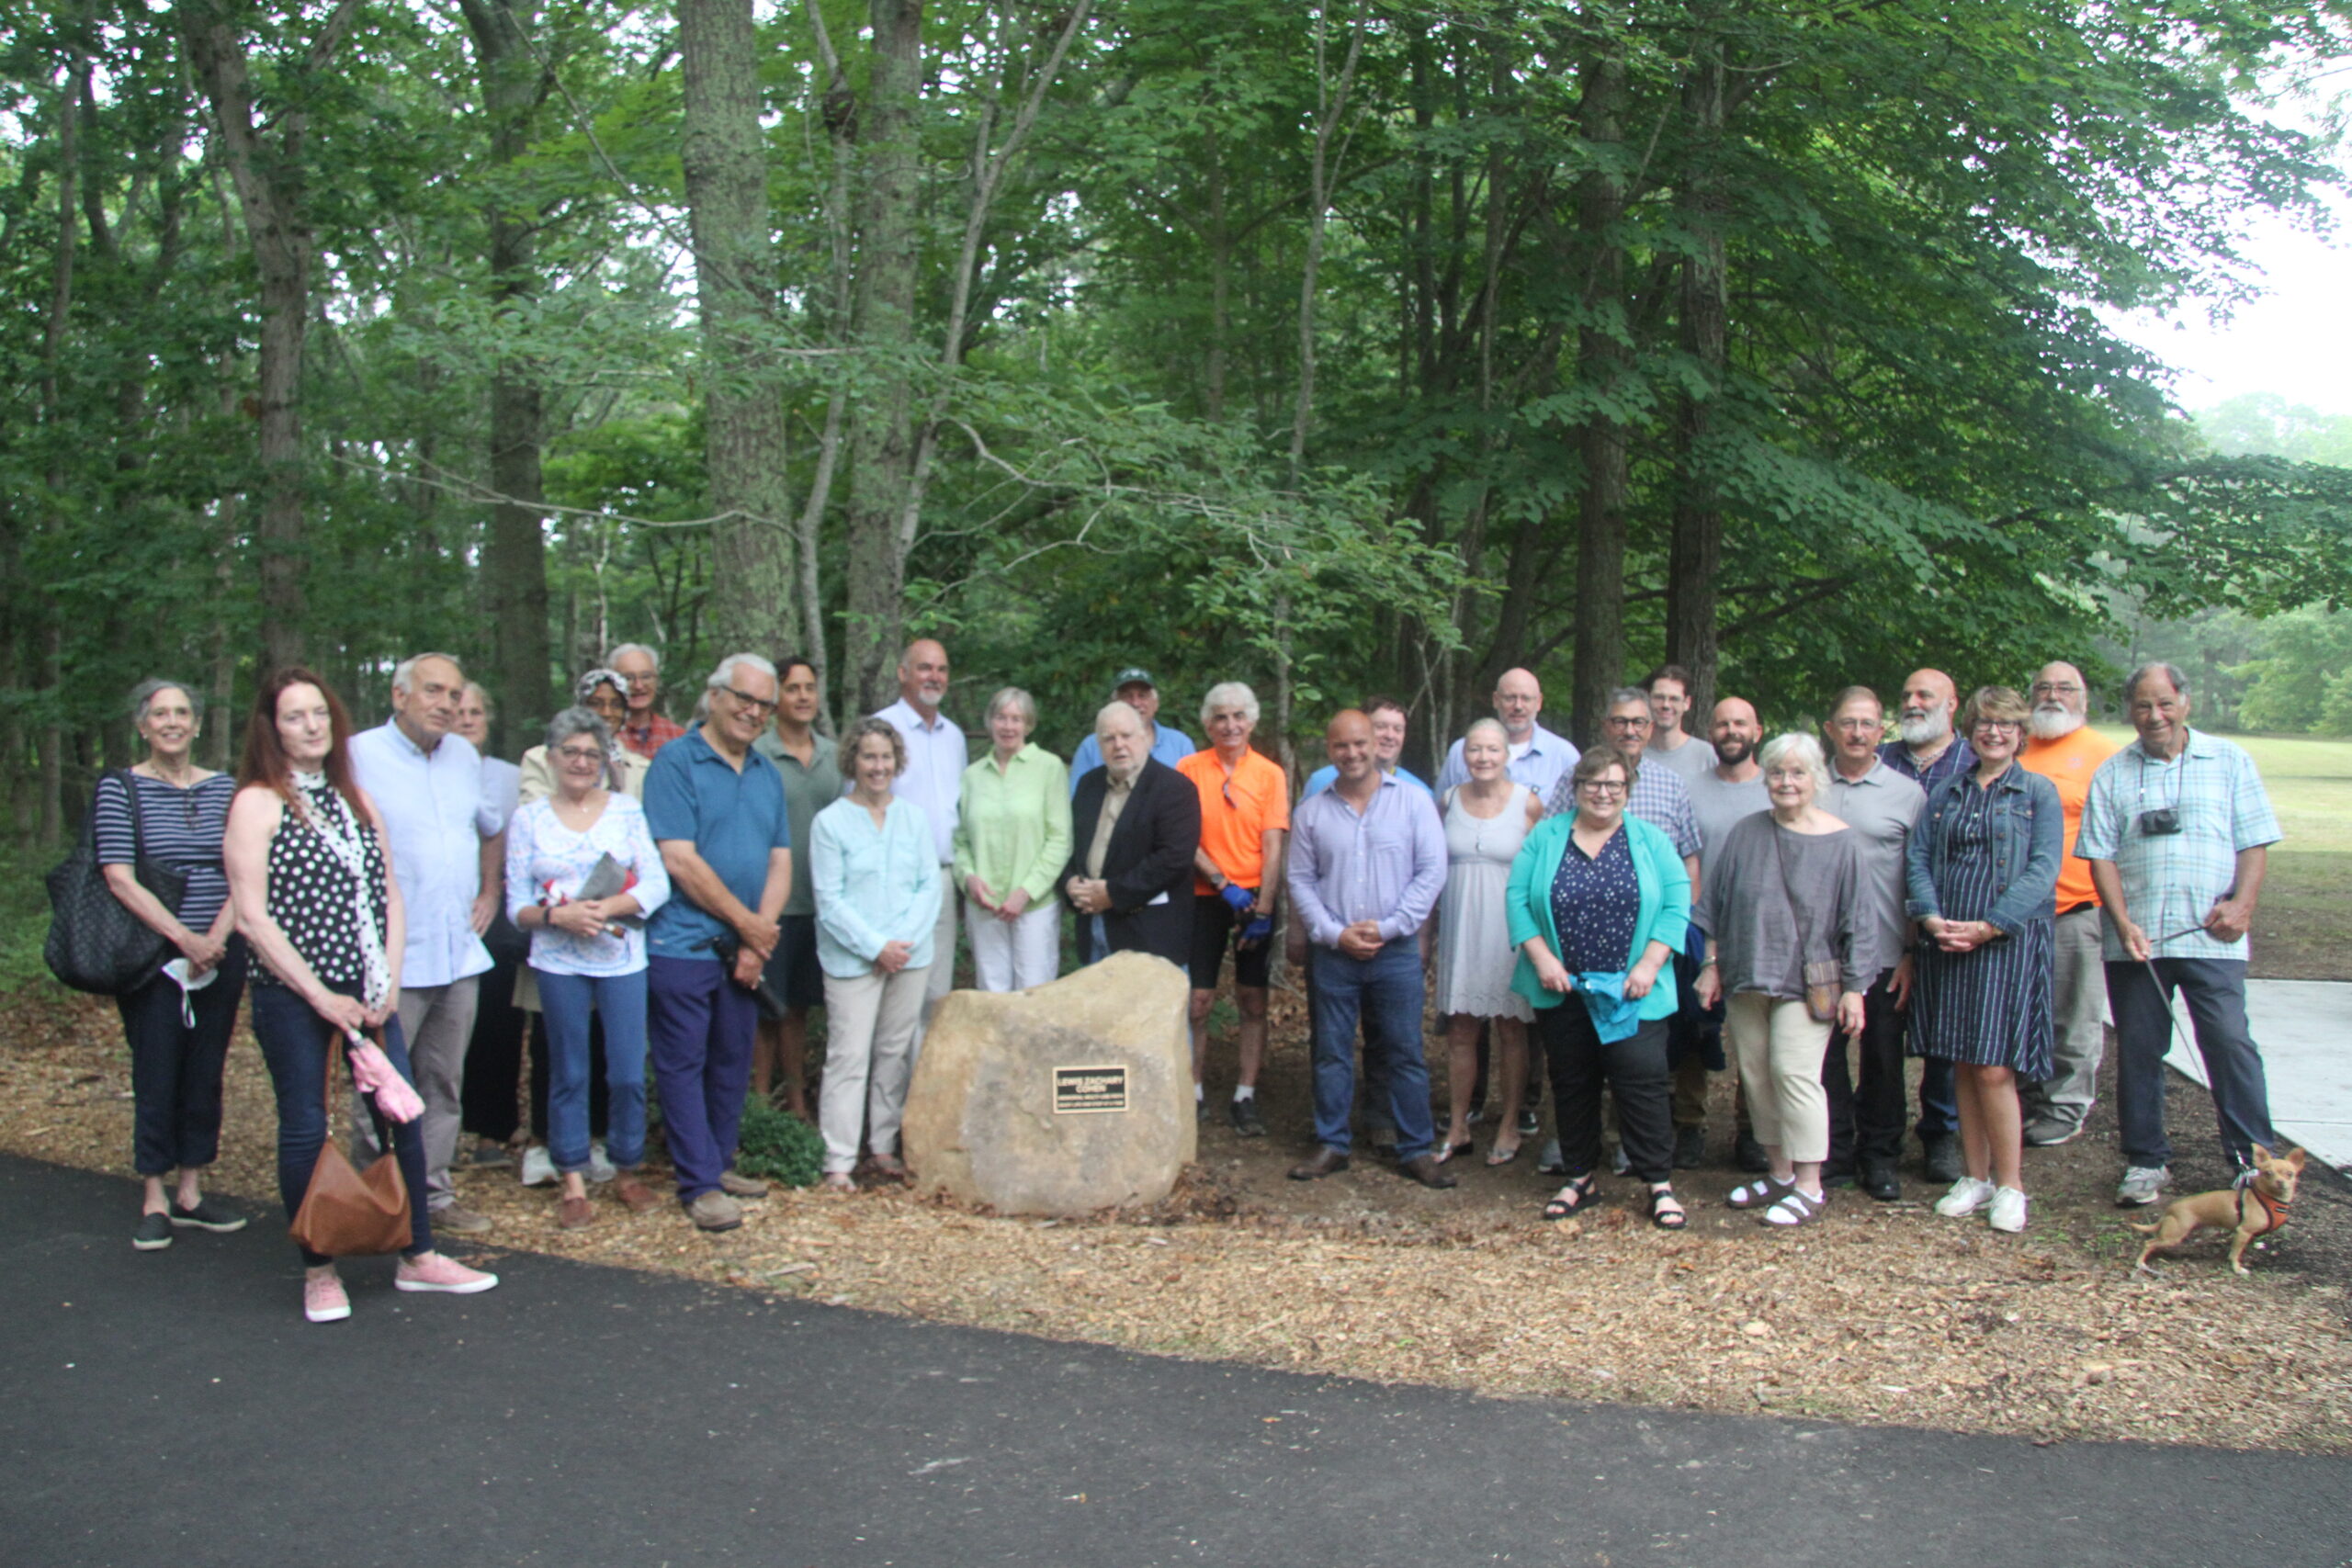 Town officials, members of the East Hampton Nature Preserve Committee and residents of Springs gathered in Buckskill on Monday morning to dedicate a new multi-use, handicapped accessible nature trail at the Buckskill Meadows Nature Preserve in honor of Zach Cohen, the longtime chairman of the Nature Preserve Committee who had long advocated for a handicapped accessible trail system.